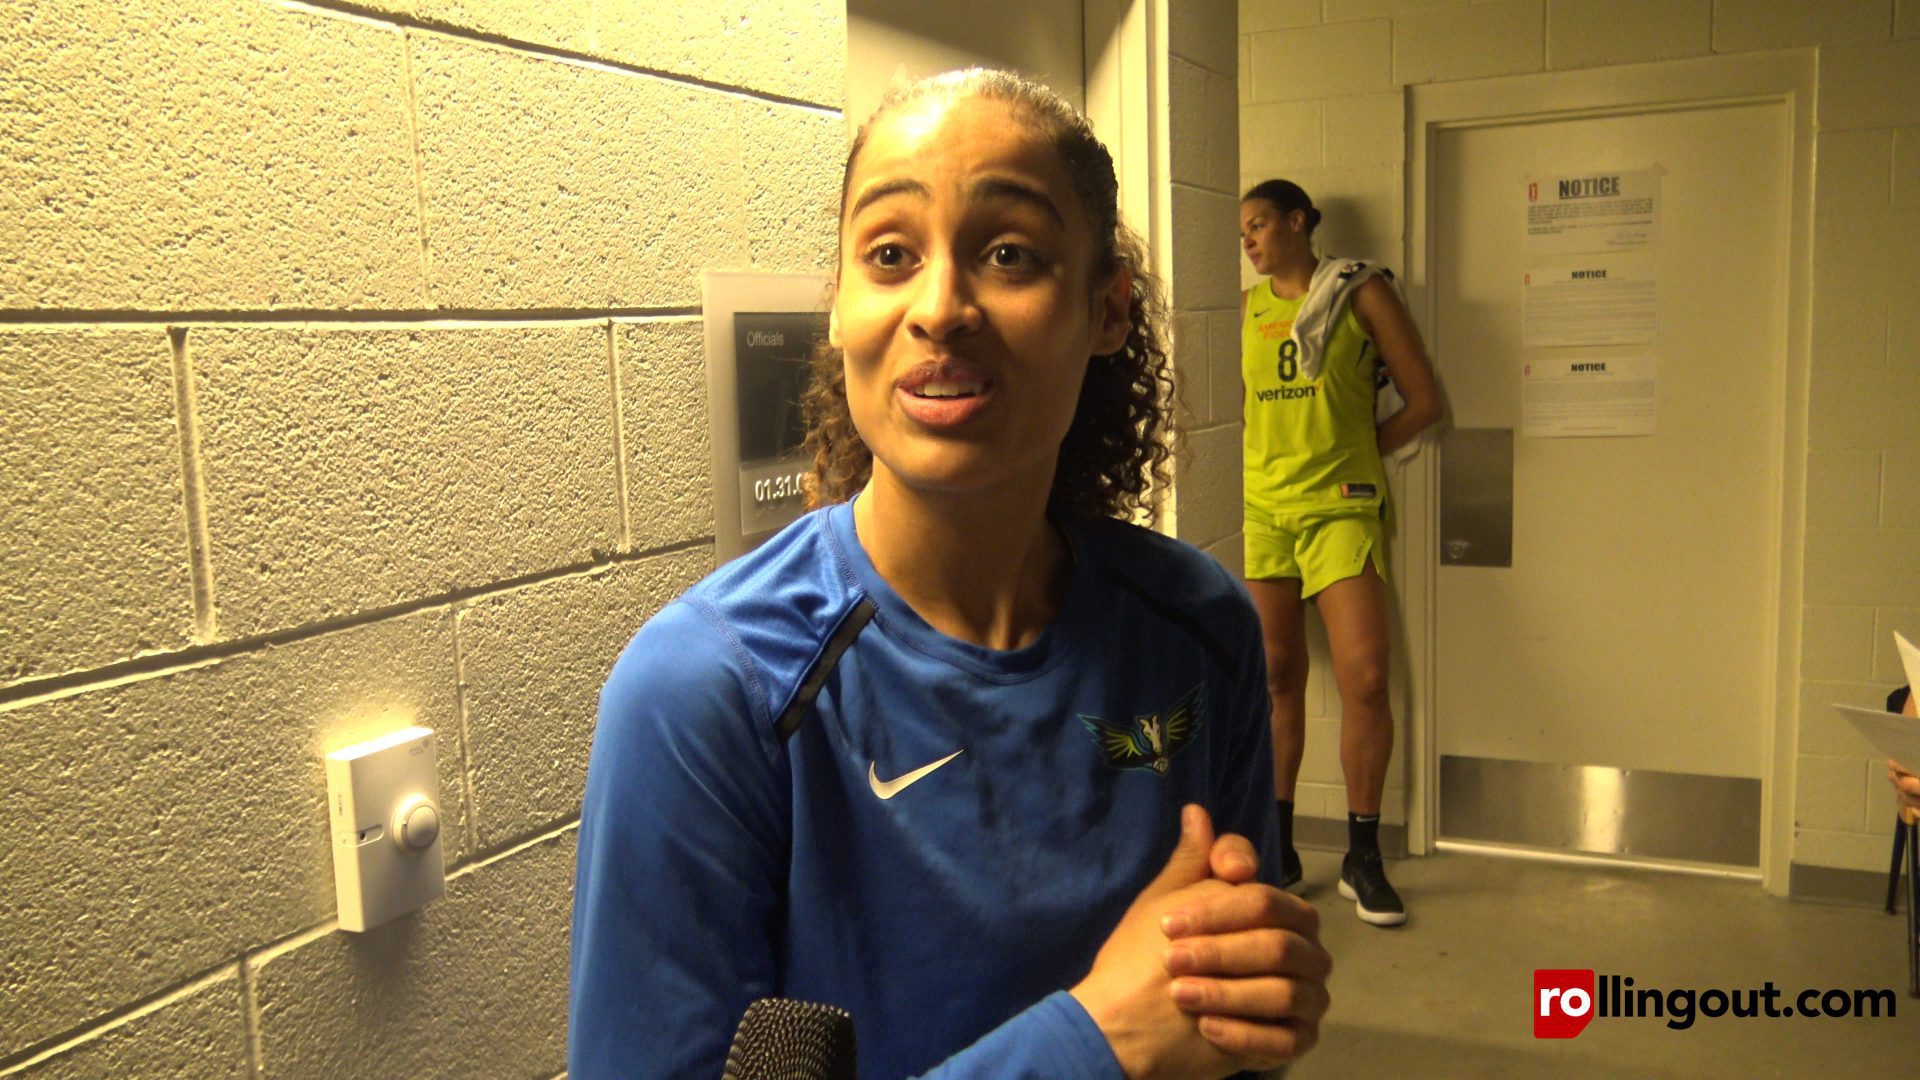 WNBA legend Skylar Diggins-Smith forced to work out at YMCA since her pregnancy